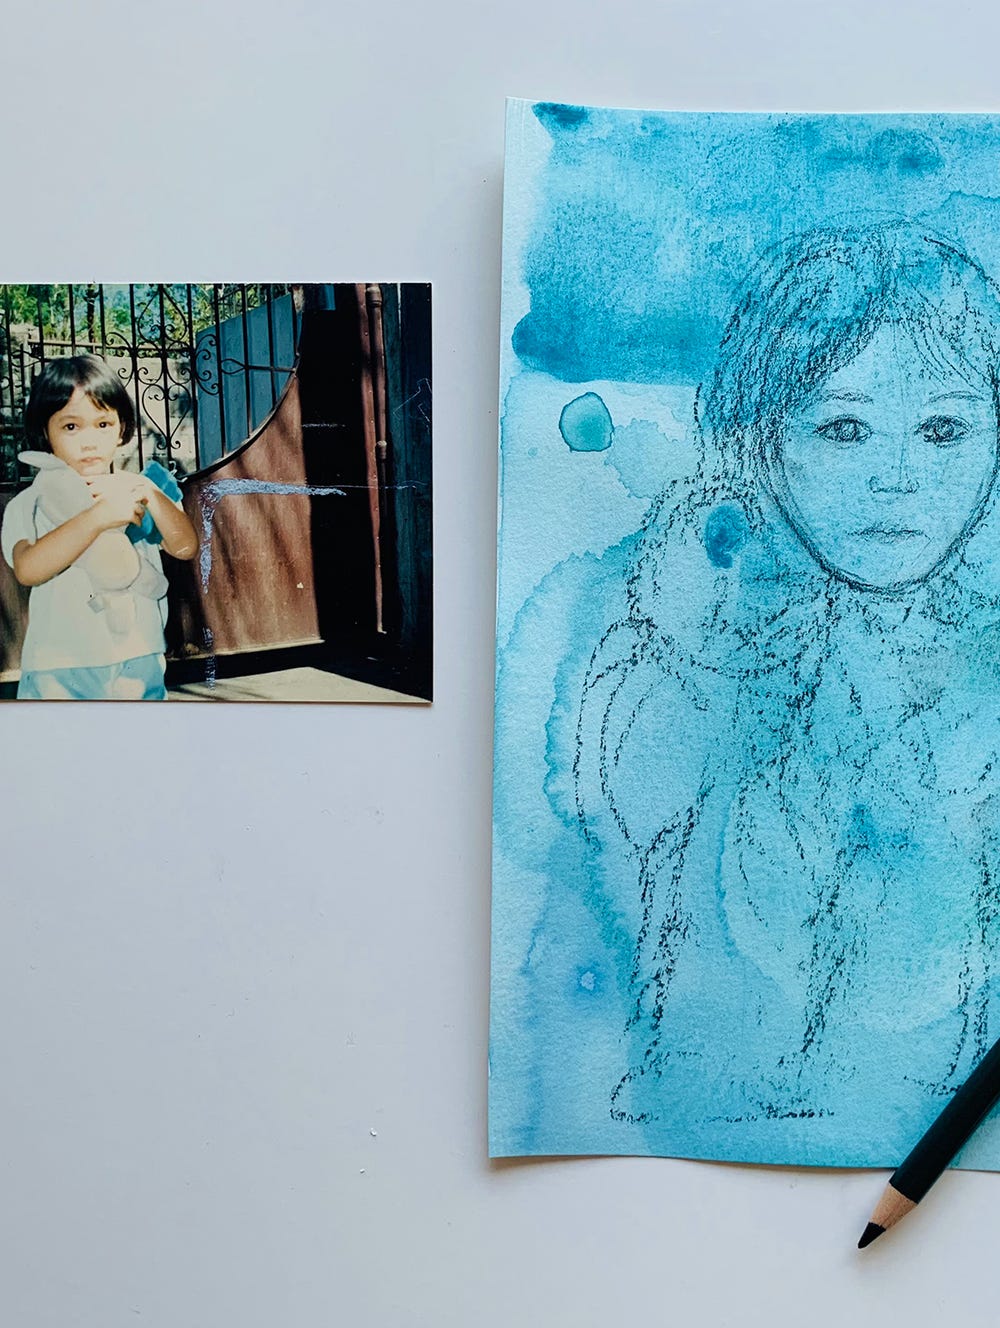 Photograph of young child next to blue painting of photograph